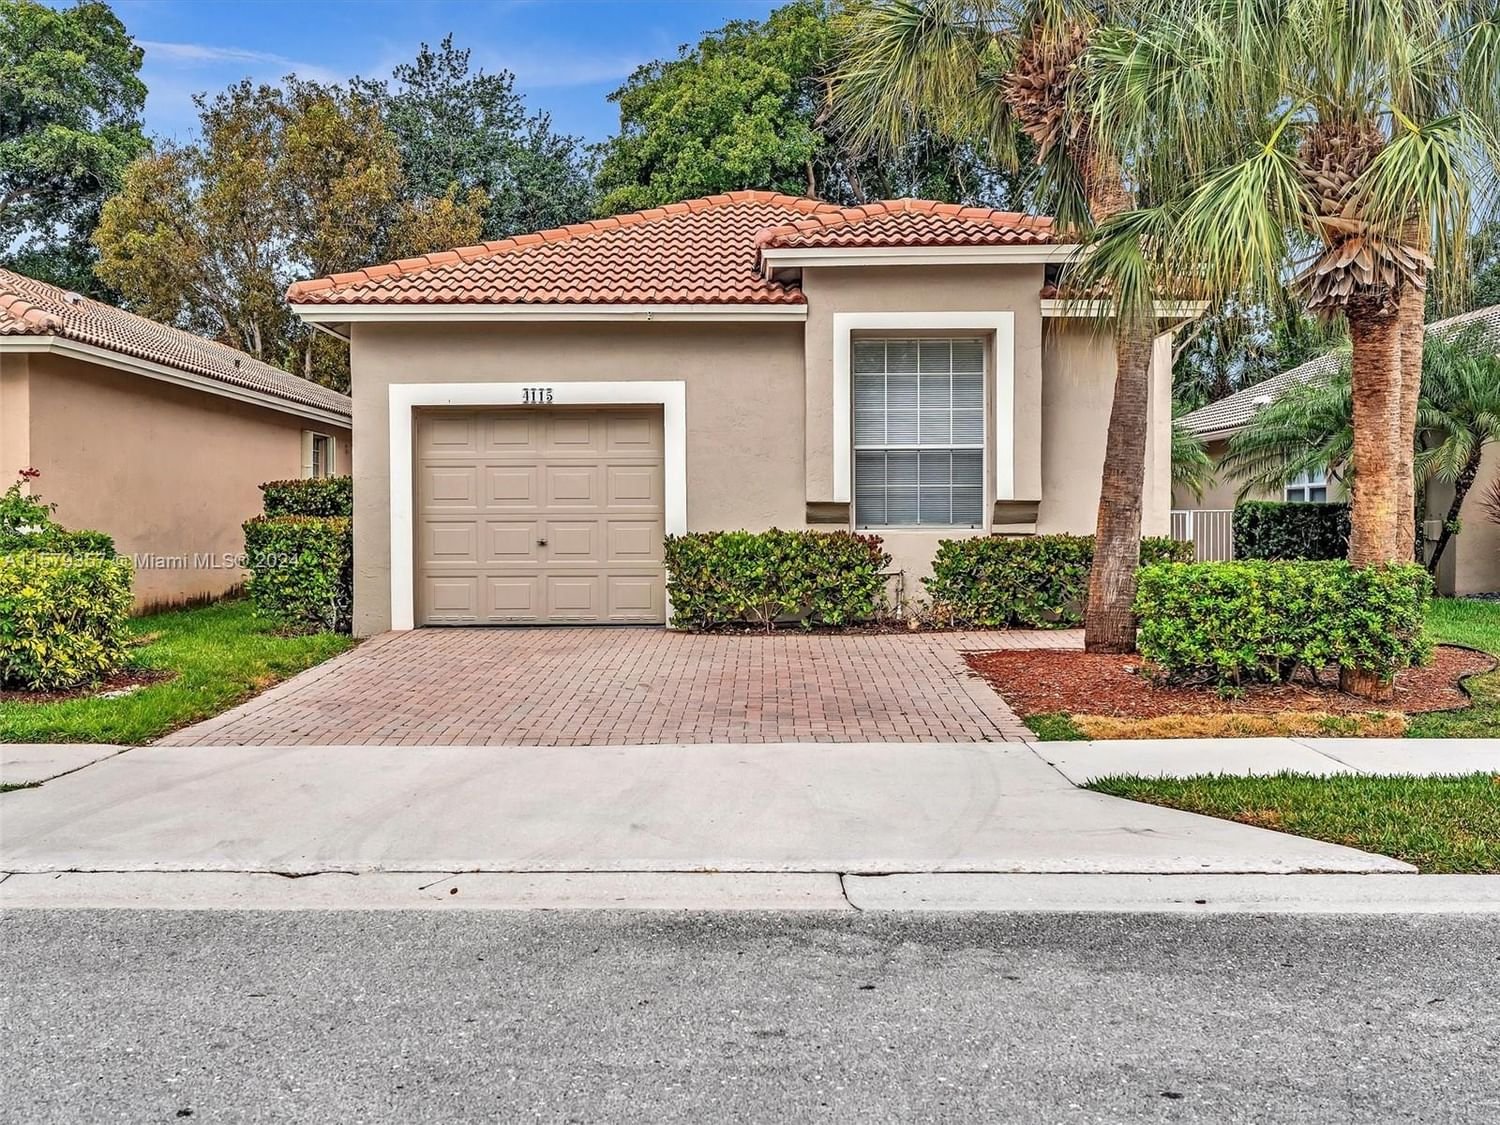 Real estate property located at 4115 Sapphire Ter, Broward County, SAPPHIRE SHORES-SAPPHIRE, Weston, FL